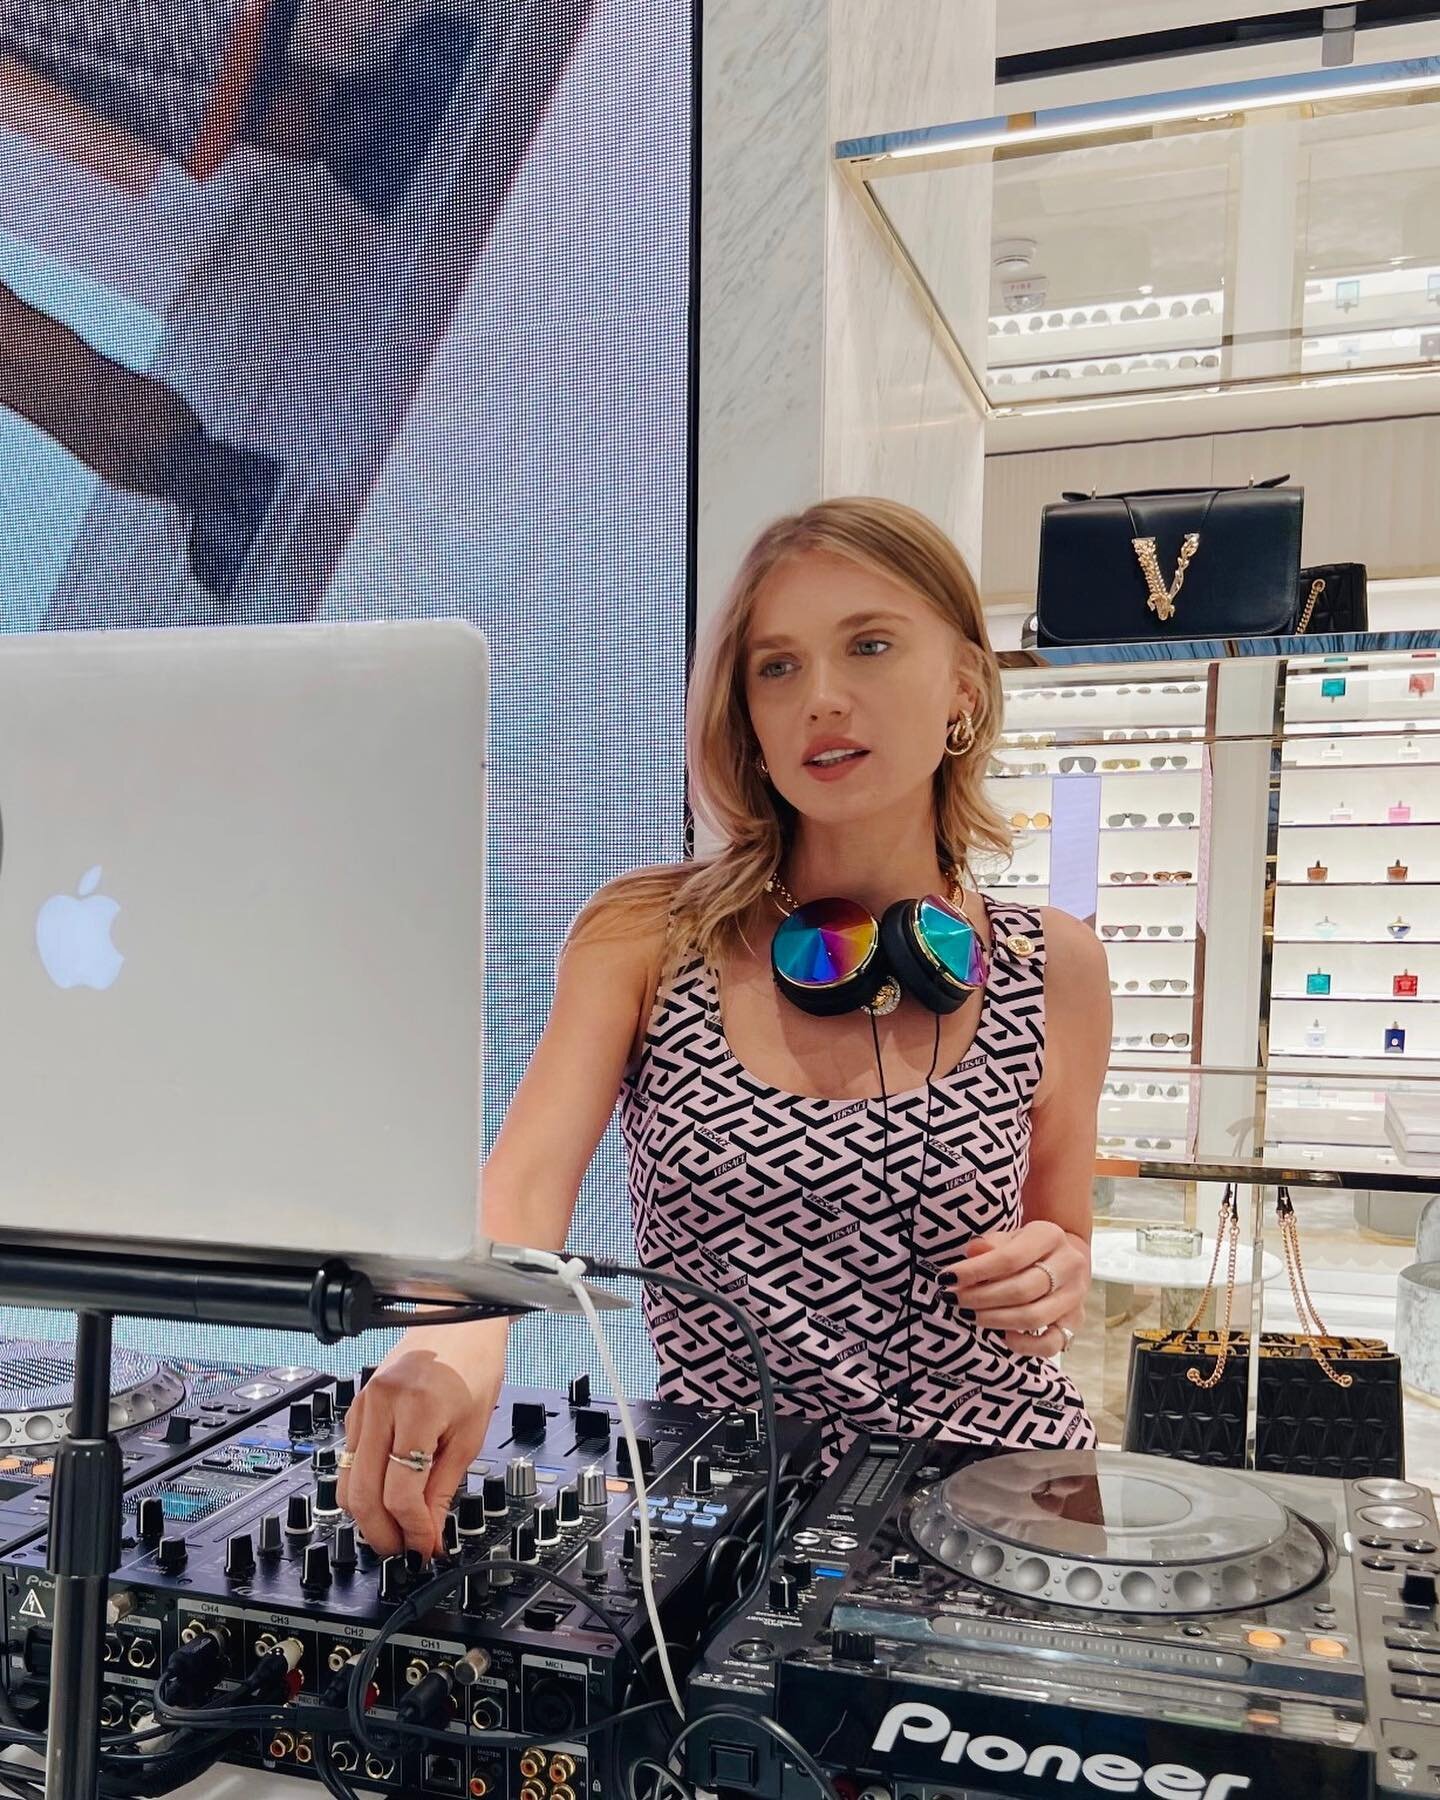 @ana_stasia_boo setting the vibe at the @versace holiday event in NYC 🎄🎄🎄 #versaceholiday 
.
.
.
.
.
.
.
#djagency #nycdj #versace #fashionevent #fashionevents #djlifestyle